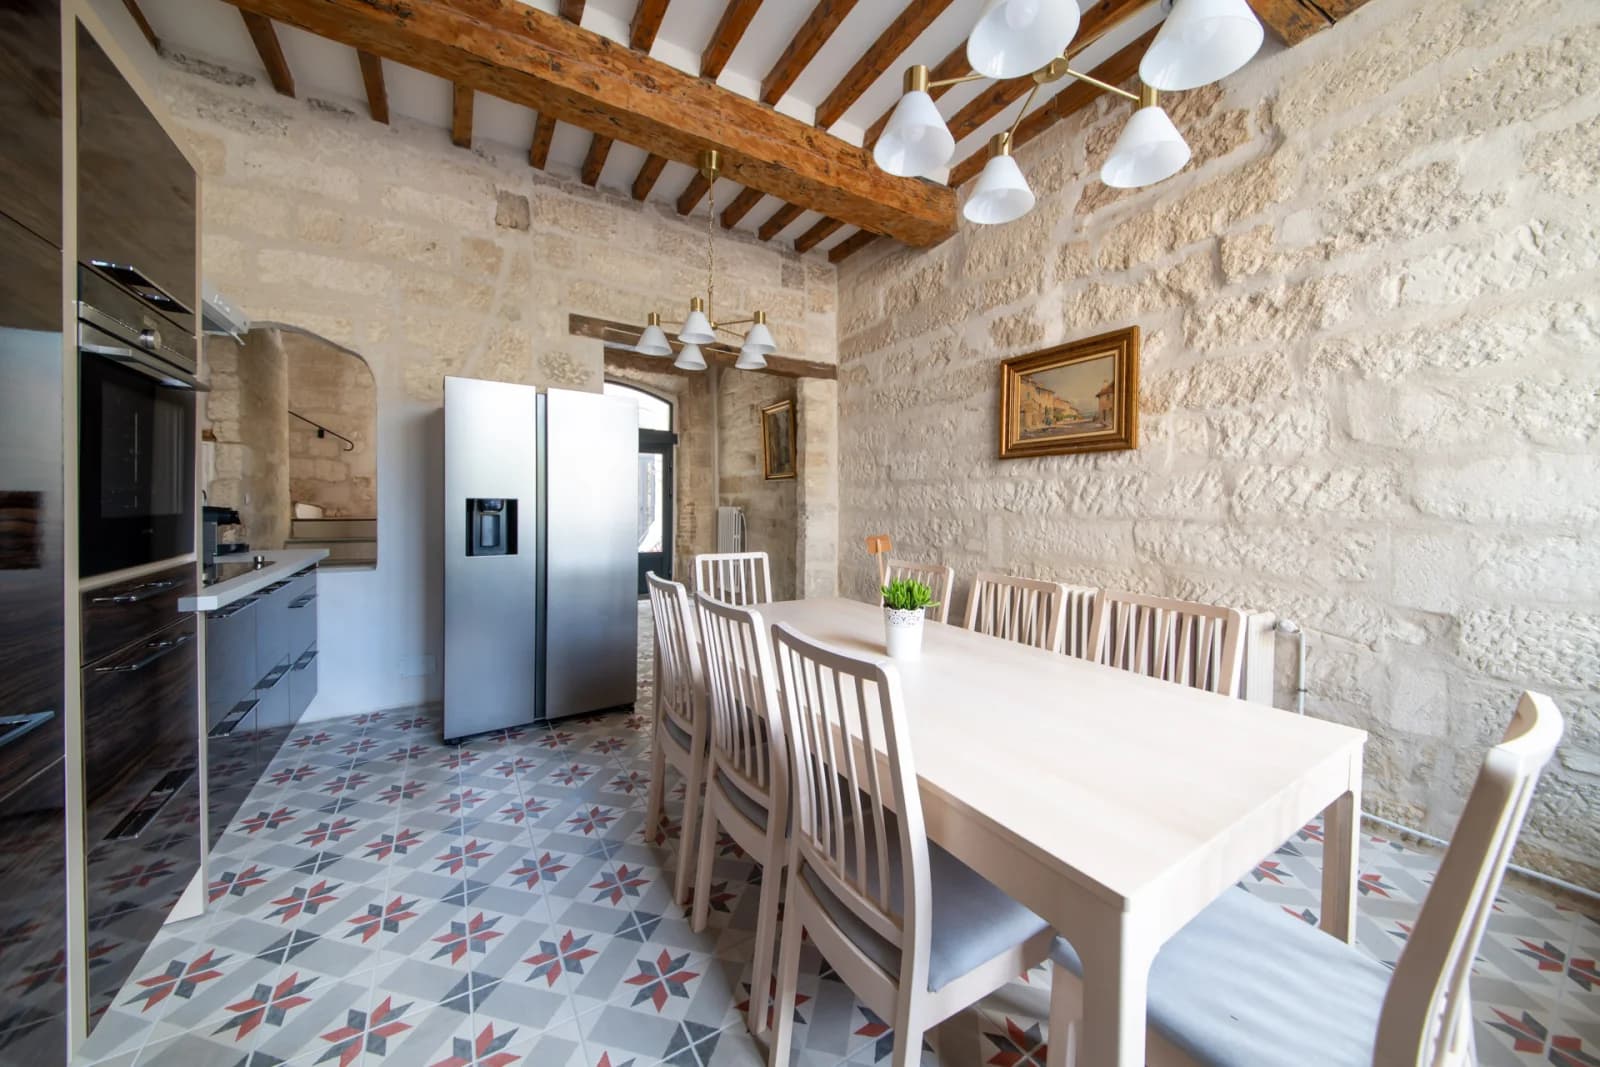 Meeting room in 16th-century town house 5 minutes from Avignon - 1